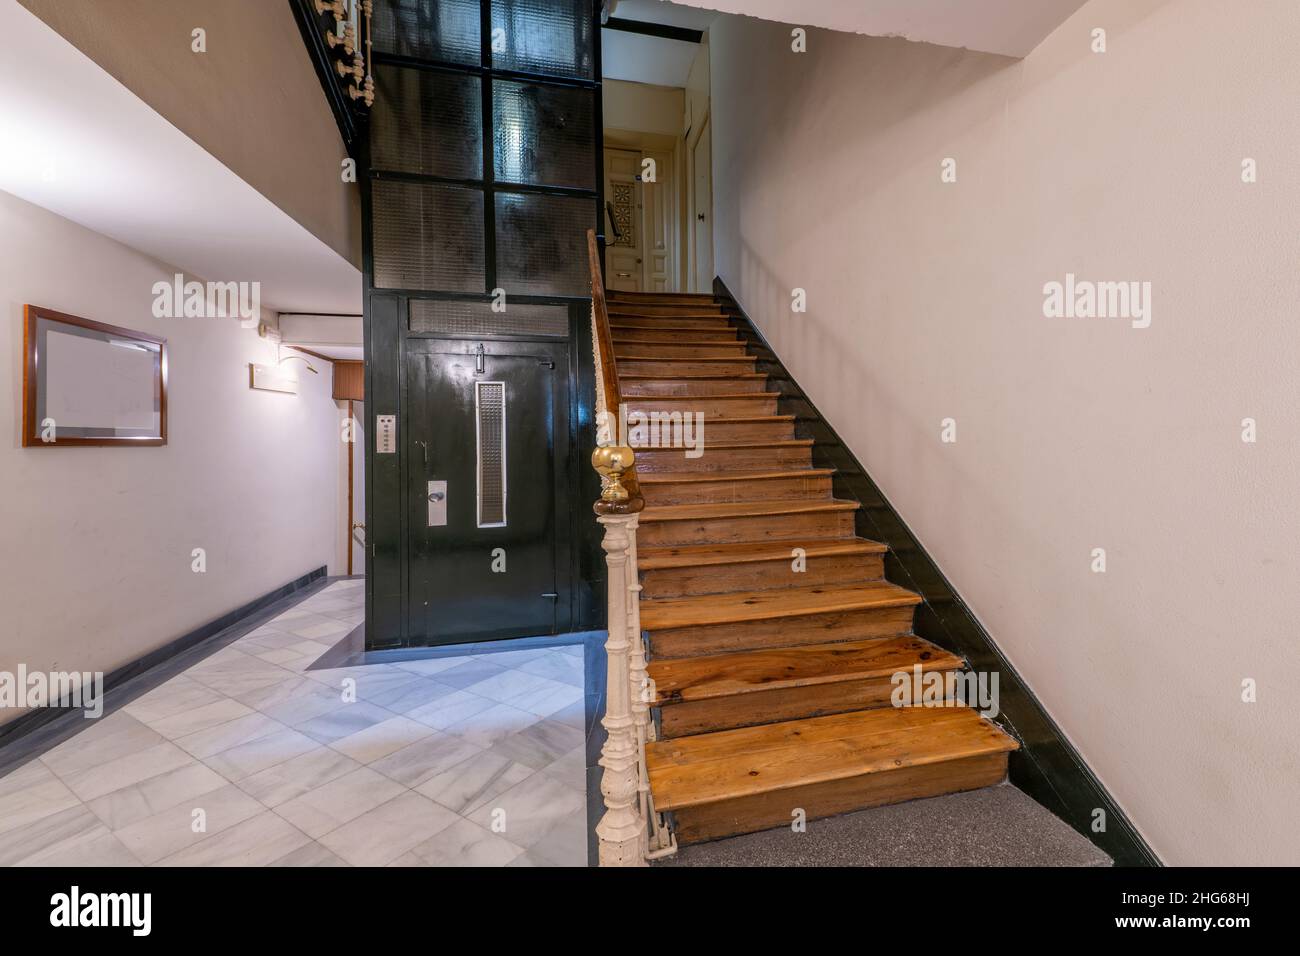 Portal of an old building with wooden stairs and green metal elevator with white marble floors Stock Photo